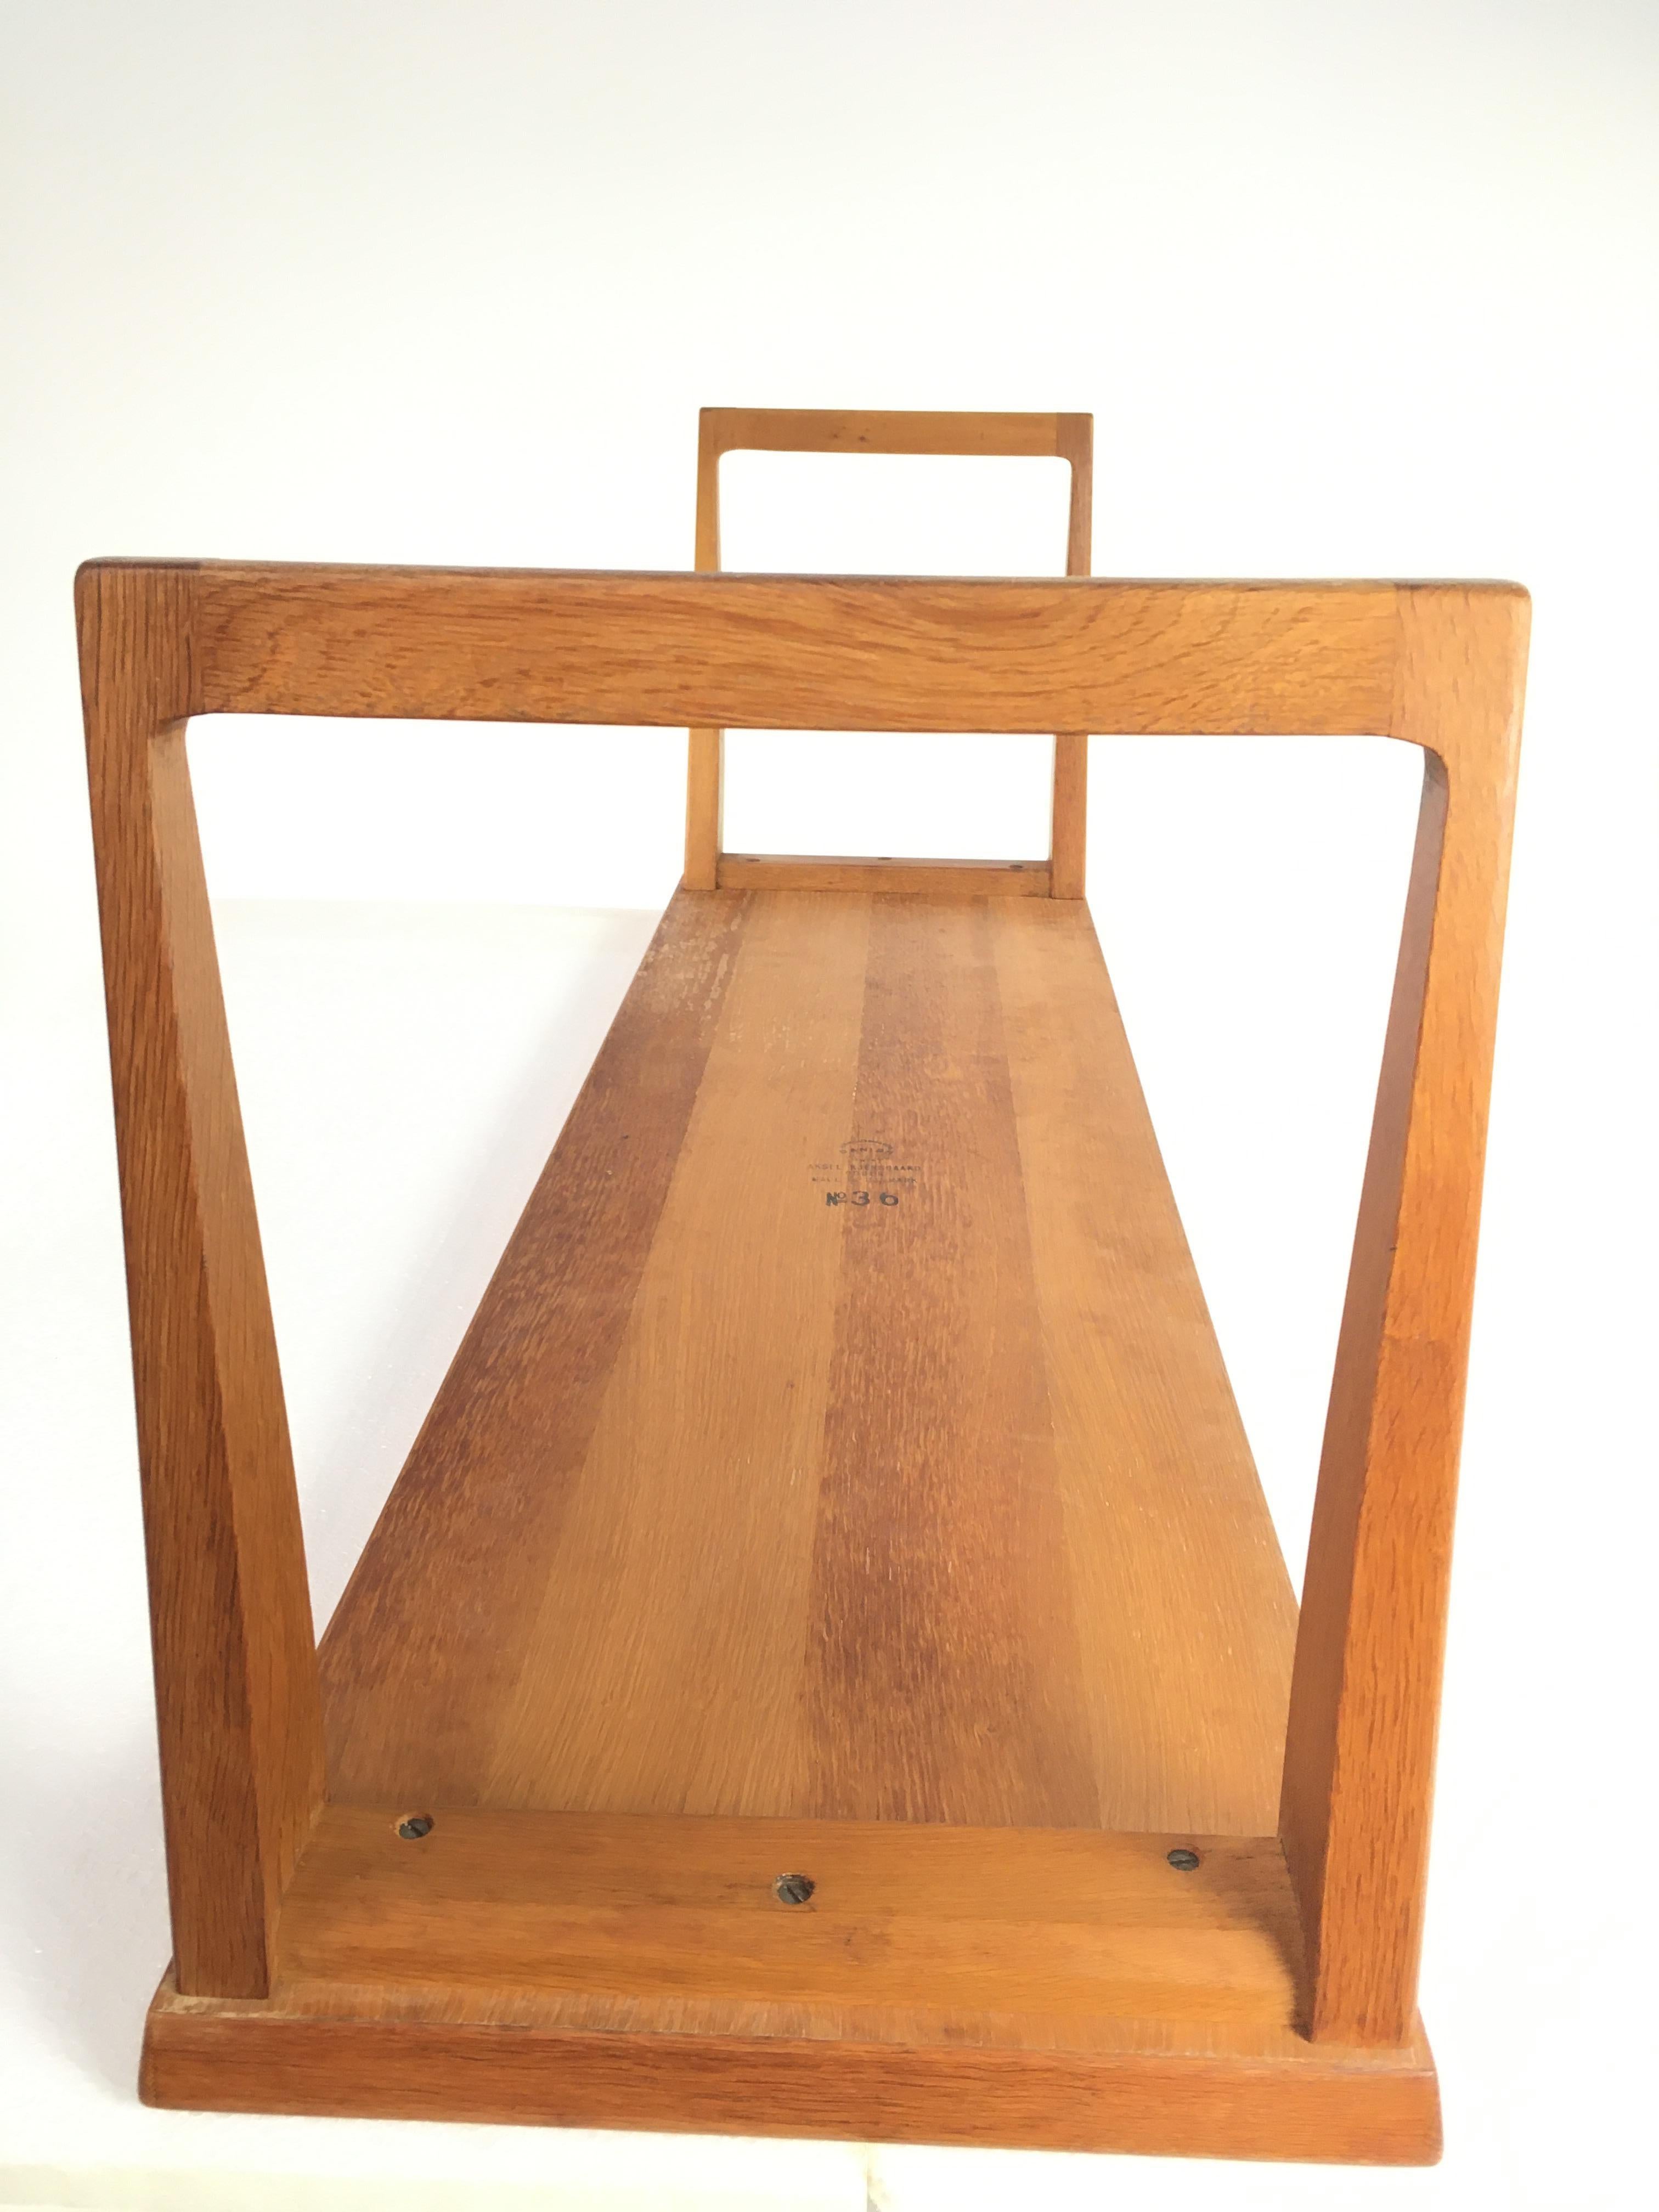 Restored and Refinished Kai Kristiansen Oak Side Table with Chest of Drawers For Sale 5